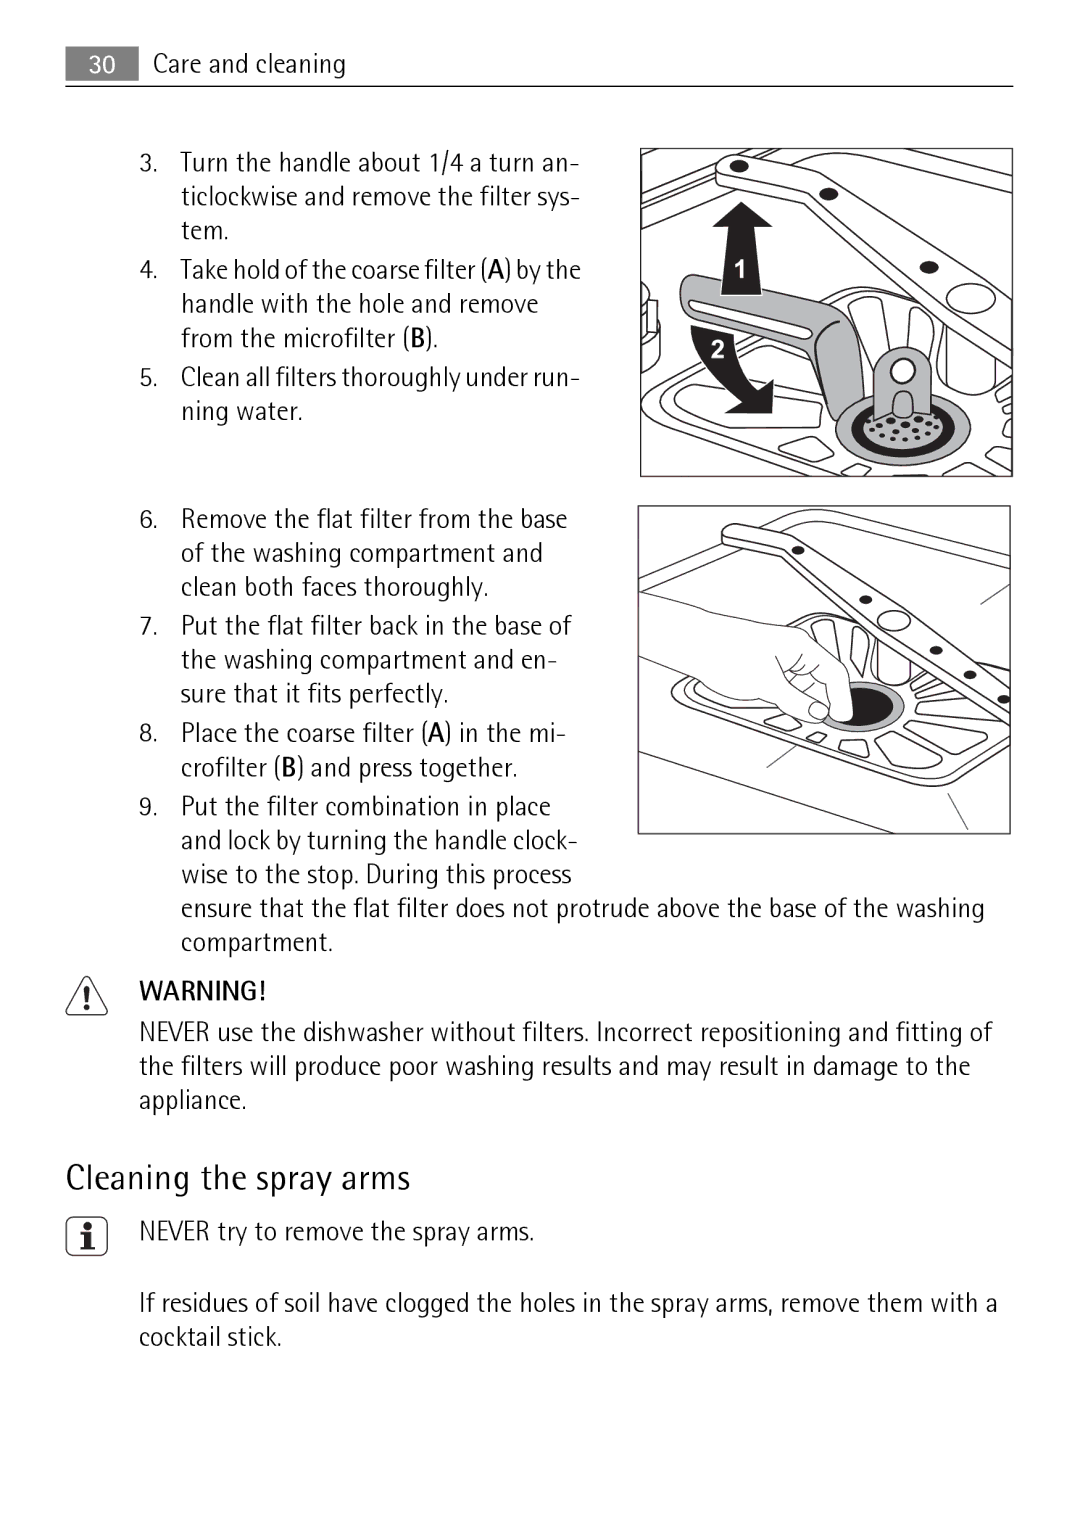 Electrolux FAVORIT 88010 user manual Cleaning the spray arms, Clean all filters thoroughly under run- ning water 